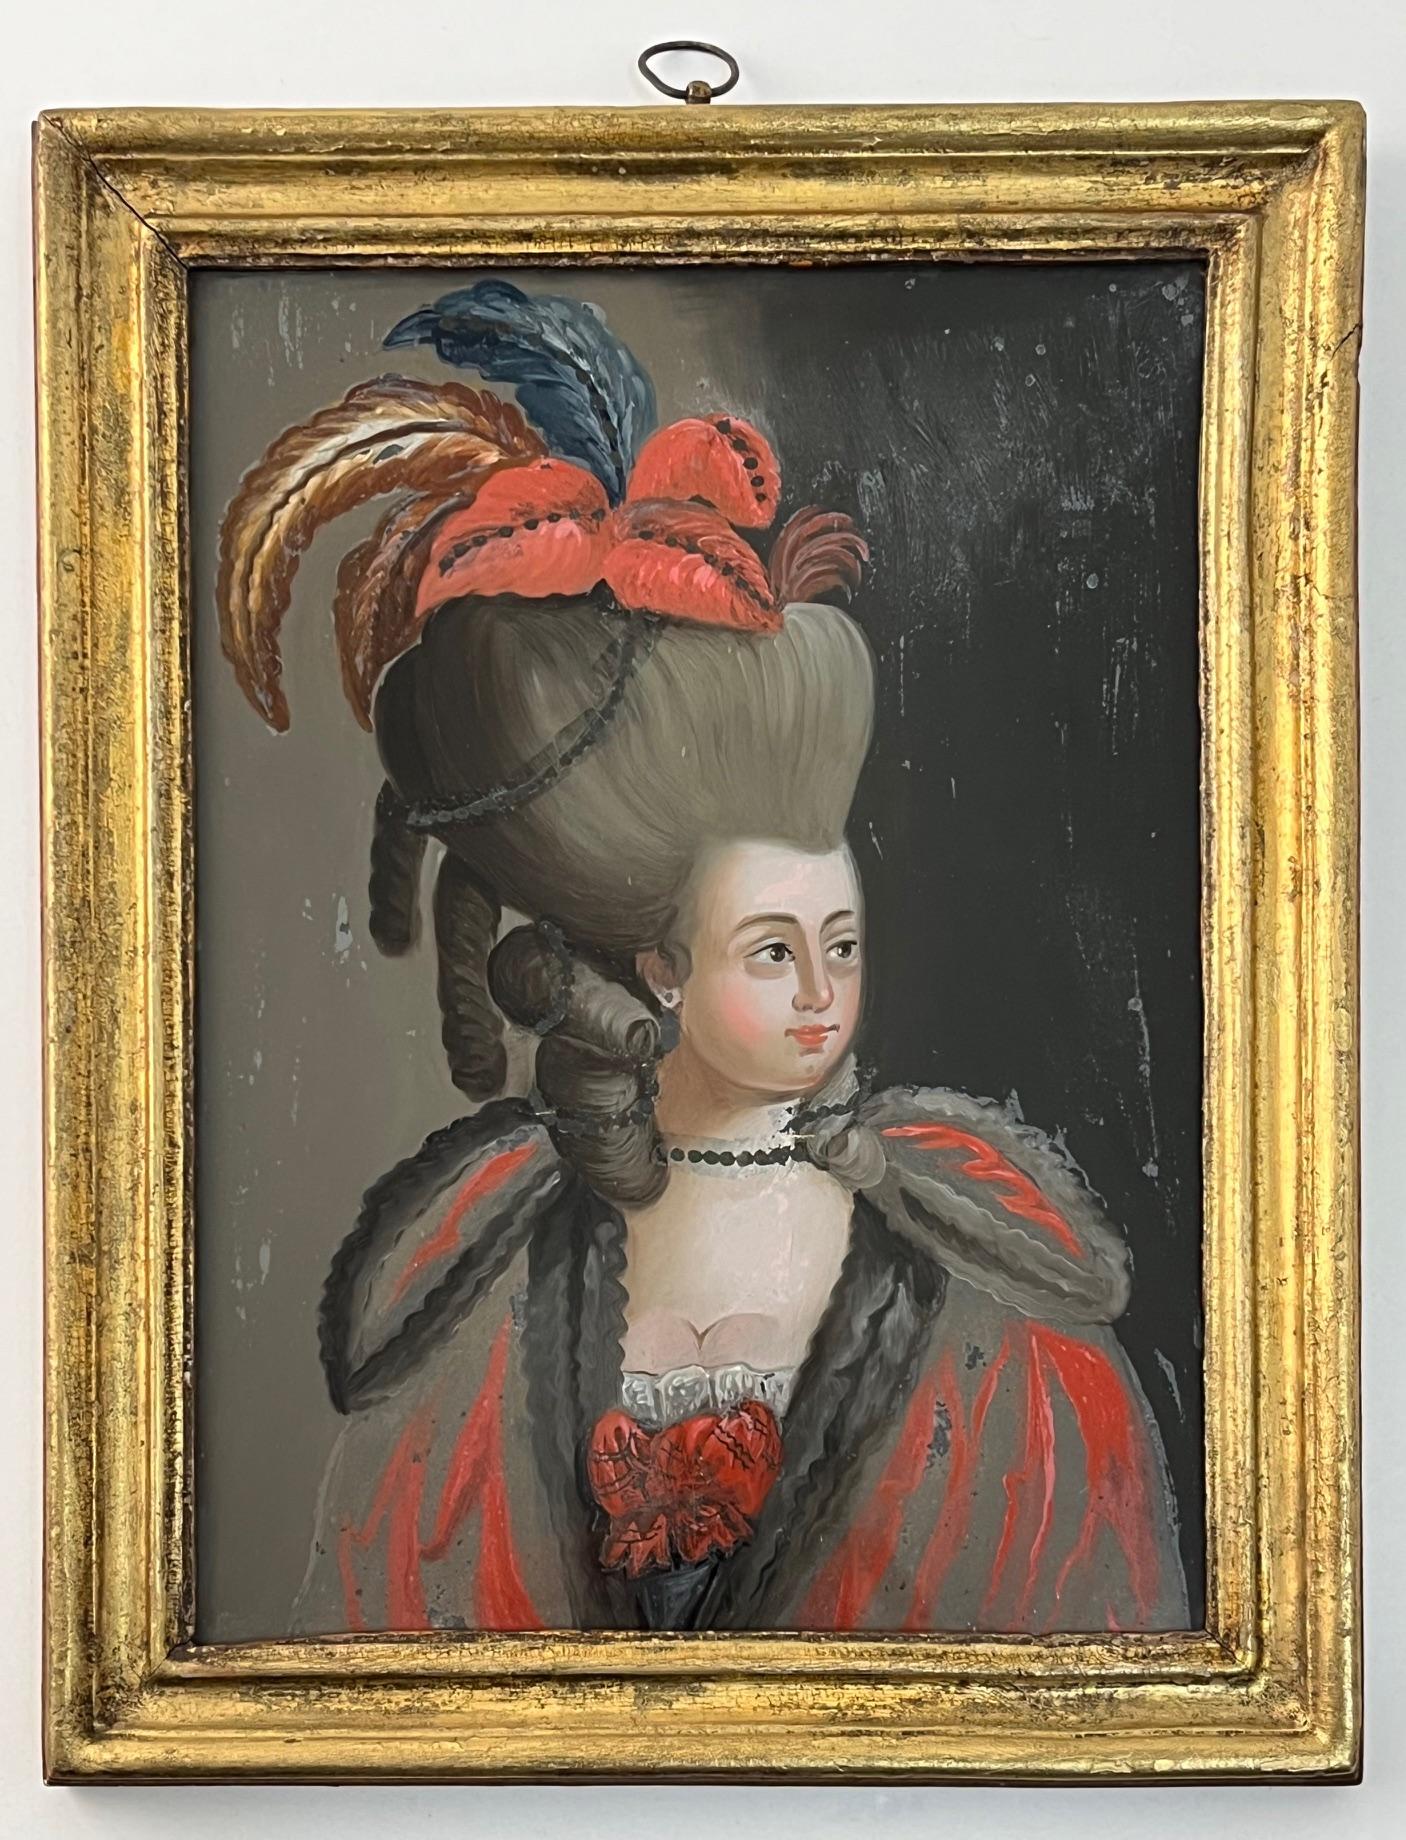 A wonderfully naive circa 1775 Italian reverse glass polychrome portrait painting of Roman manufacture depicting a noble or fashionable lady in lavish attire housed in original molded giltwood frame.  Glass plate measures 9